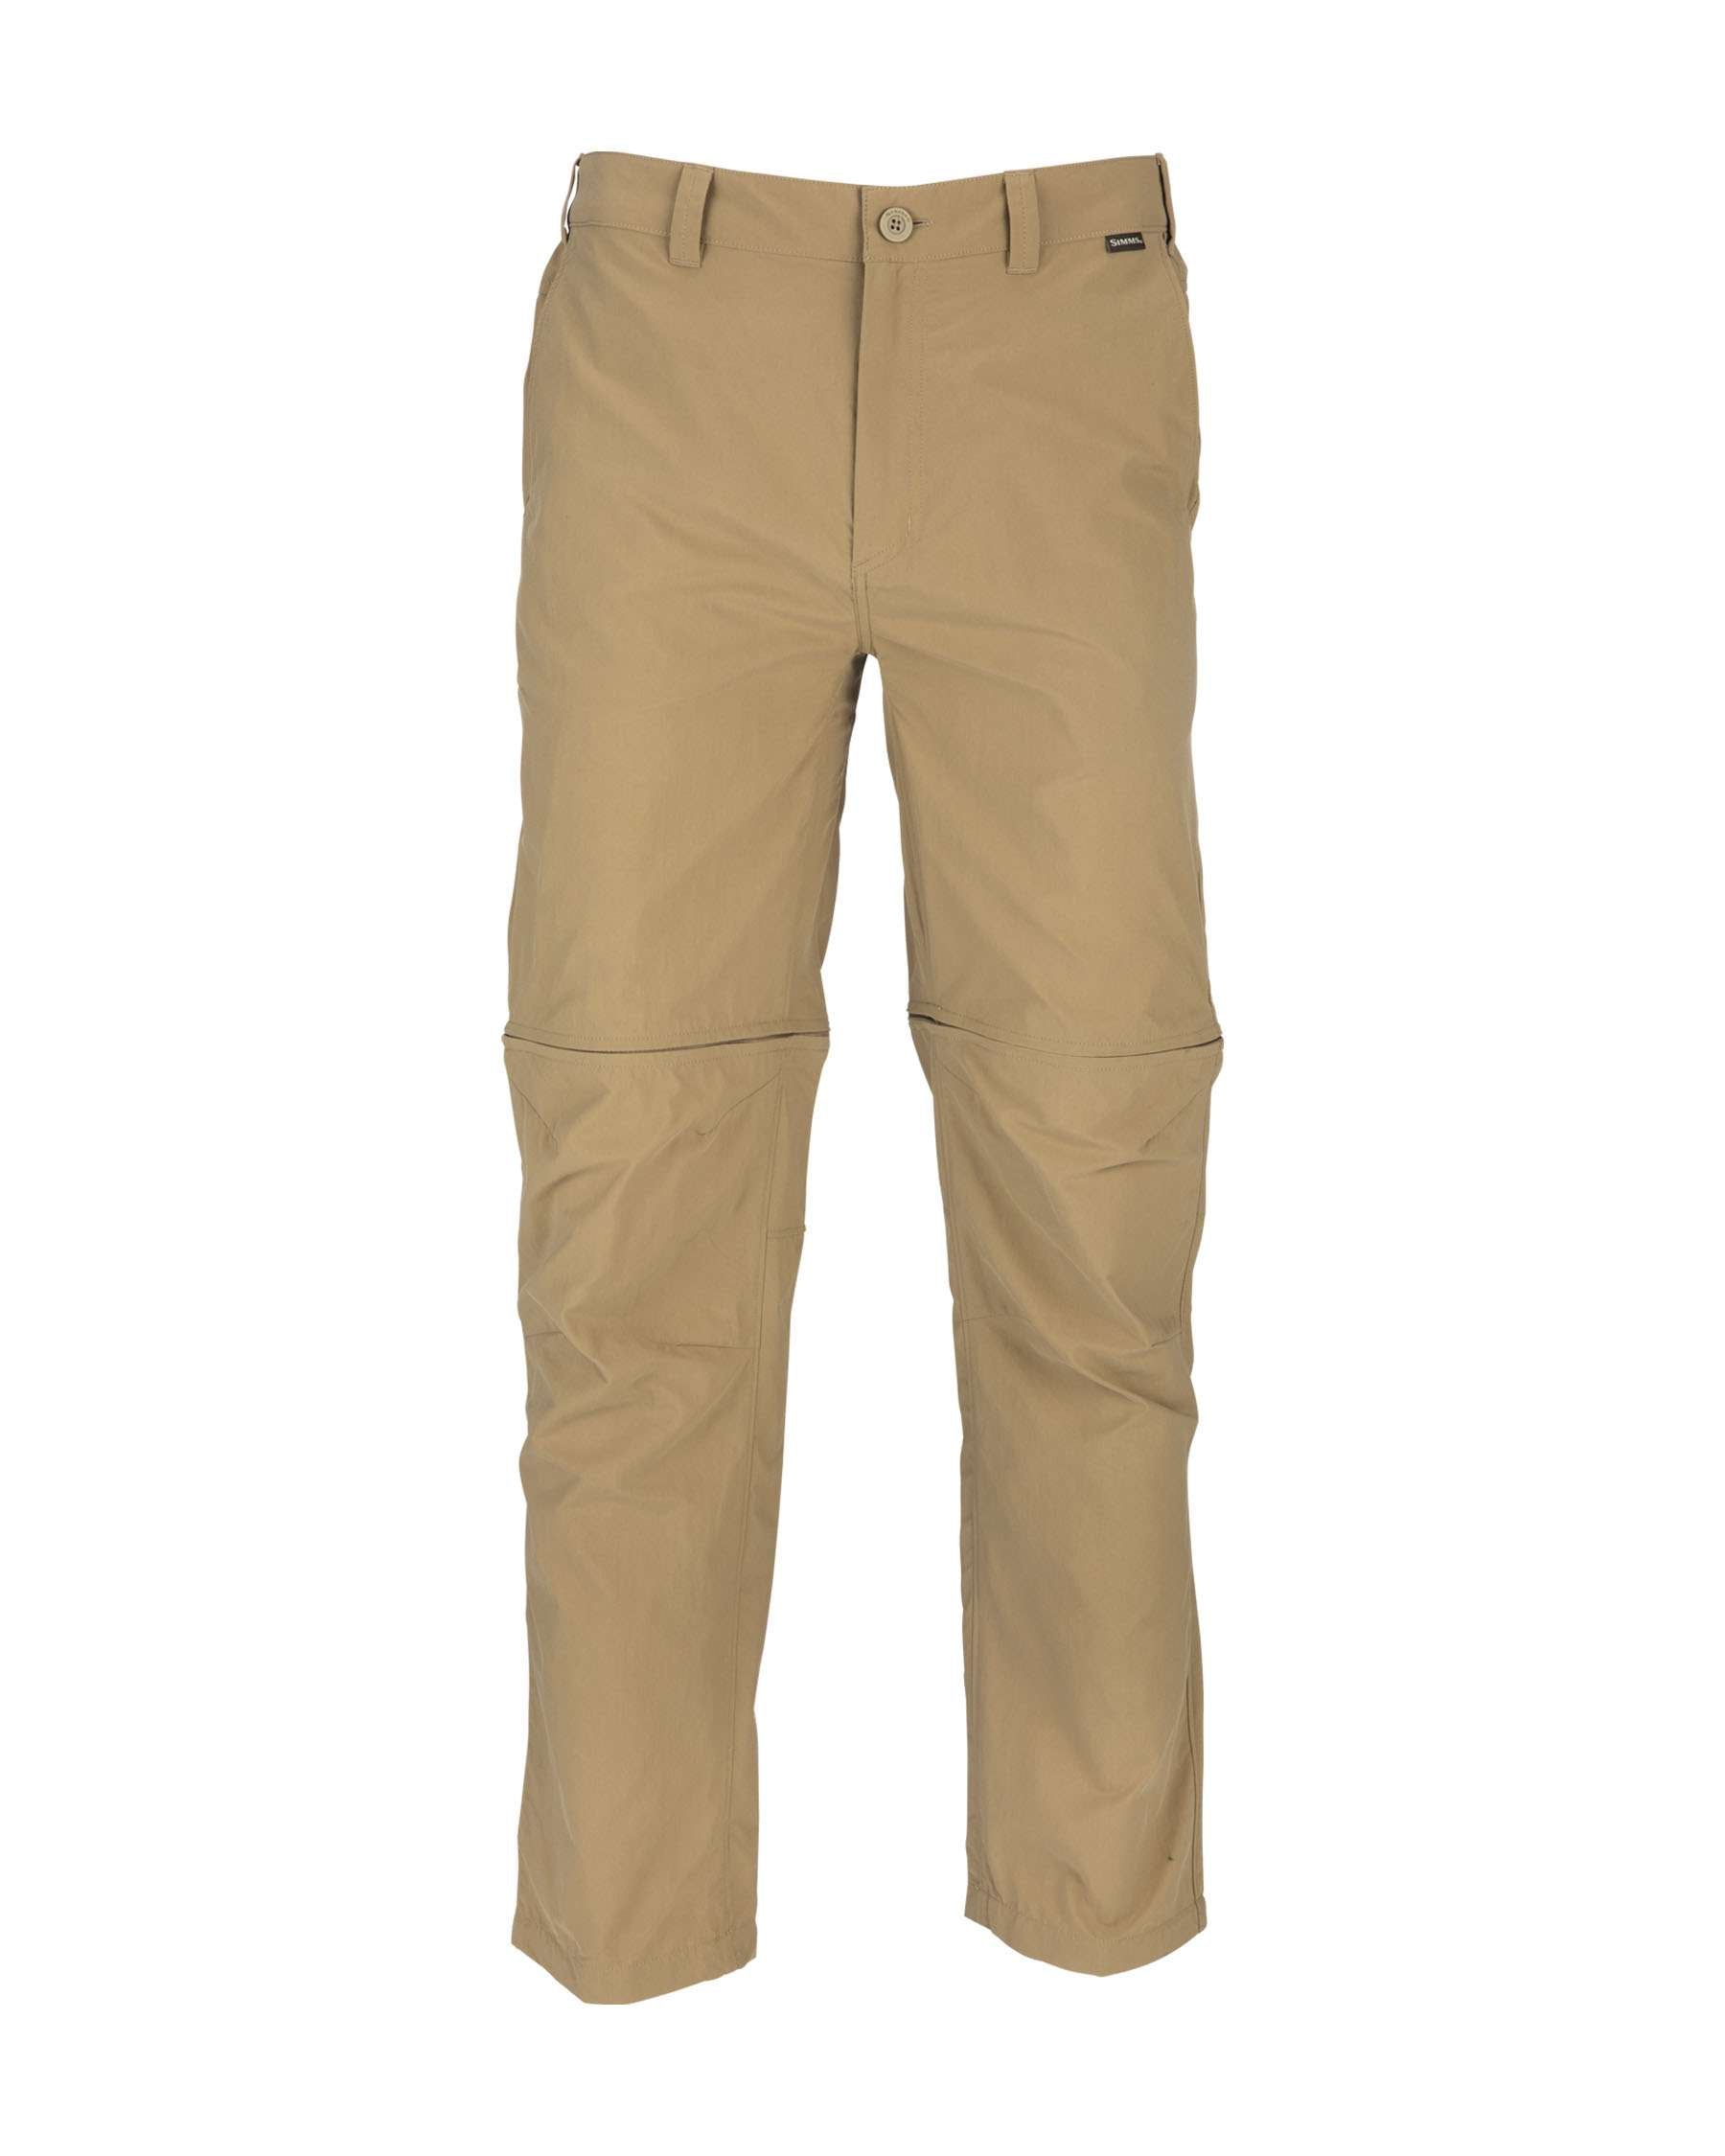 M's Superlight Zip-Off Fishing Pants | Simms Fishing Products